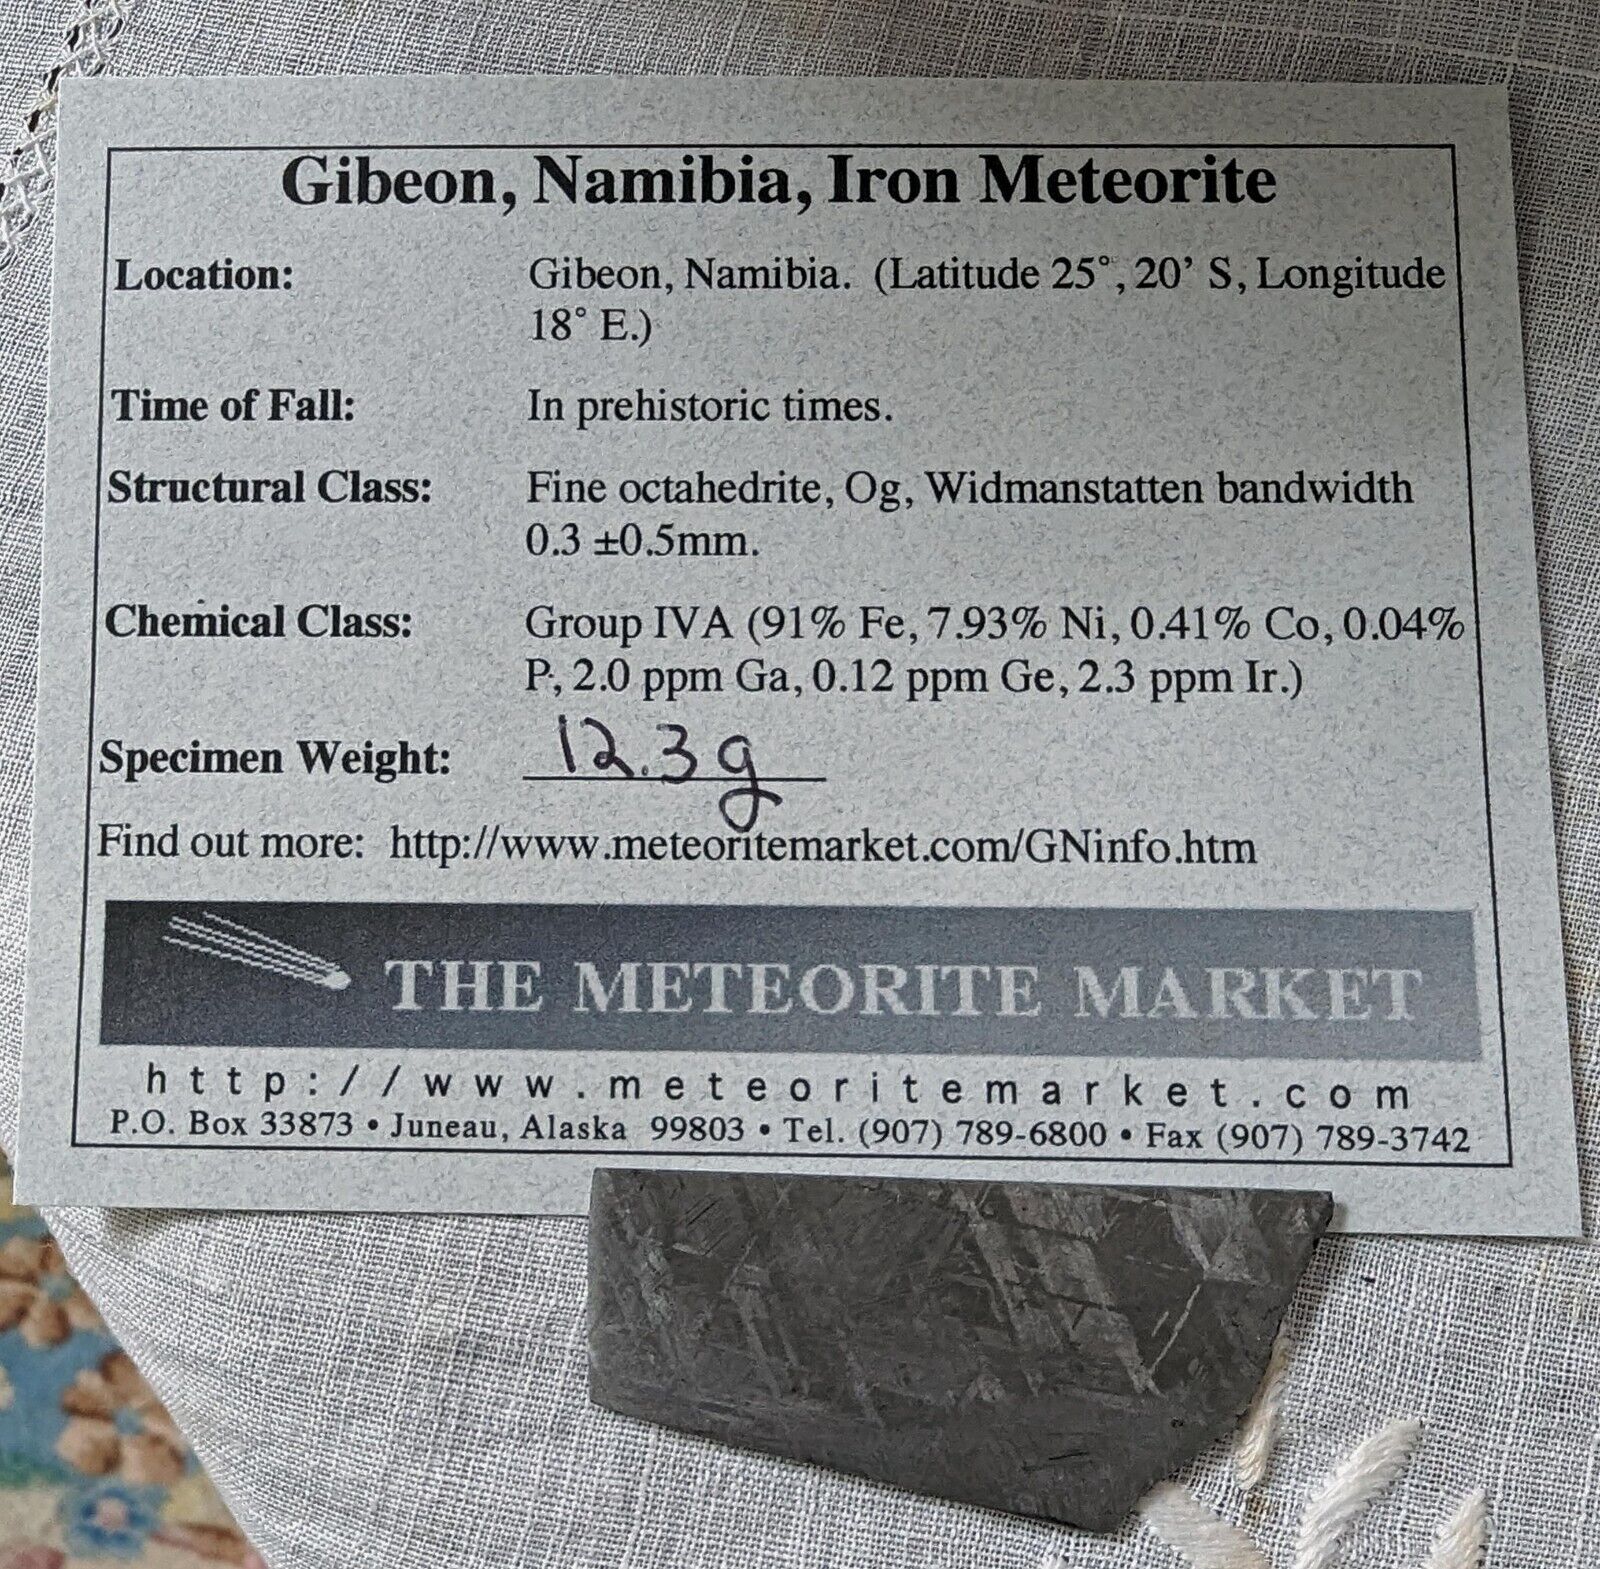 12.3 GM ETCHED GIBEON IRON METEORITE SLICE MUSEUM  GRADE   NAMIBIA AFRICA